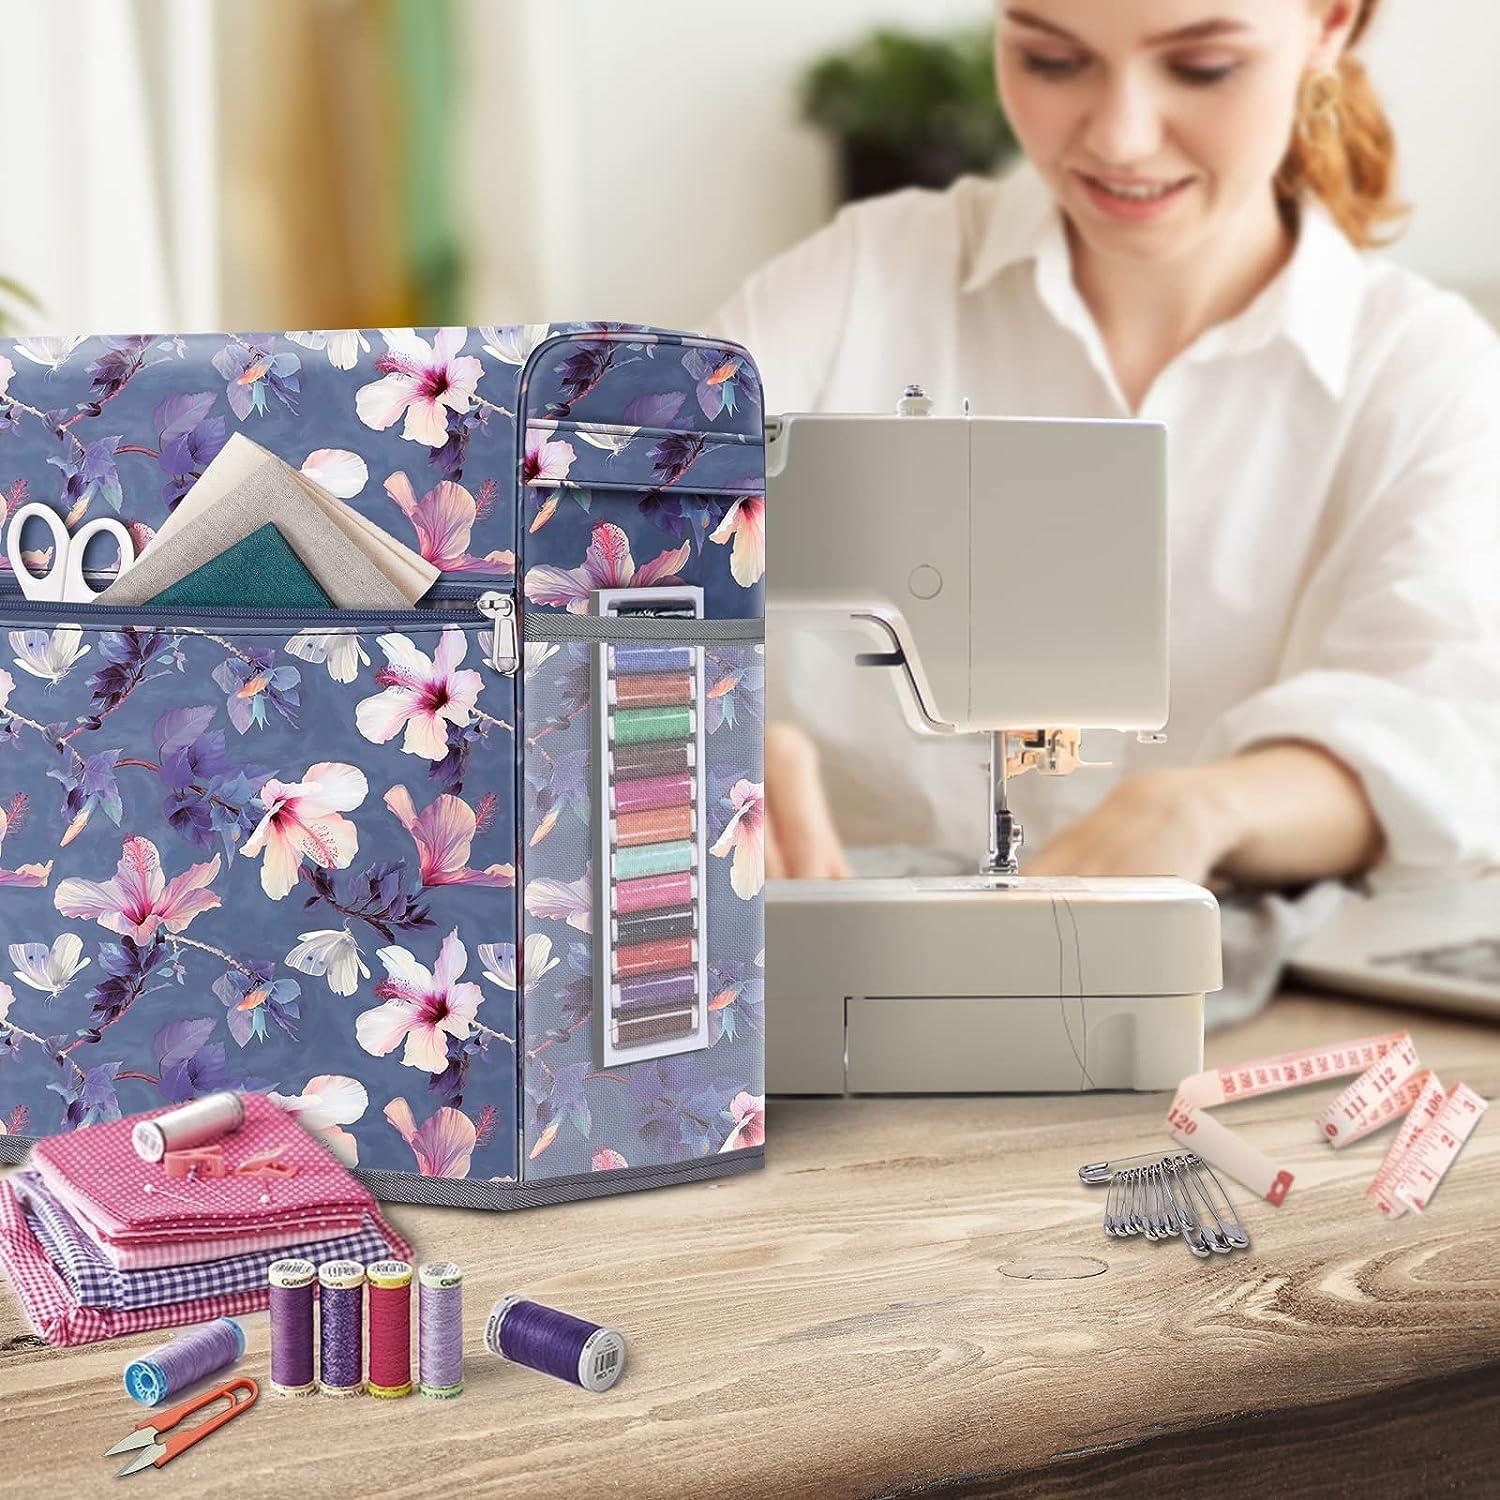 Sewing Machine Cover Foldable Sewing Machine Dust Cover with 3 Storage  Pockets Dust Cover with Standard